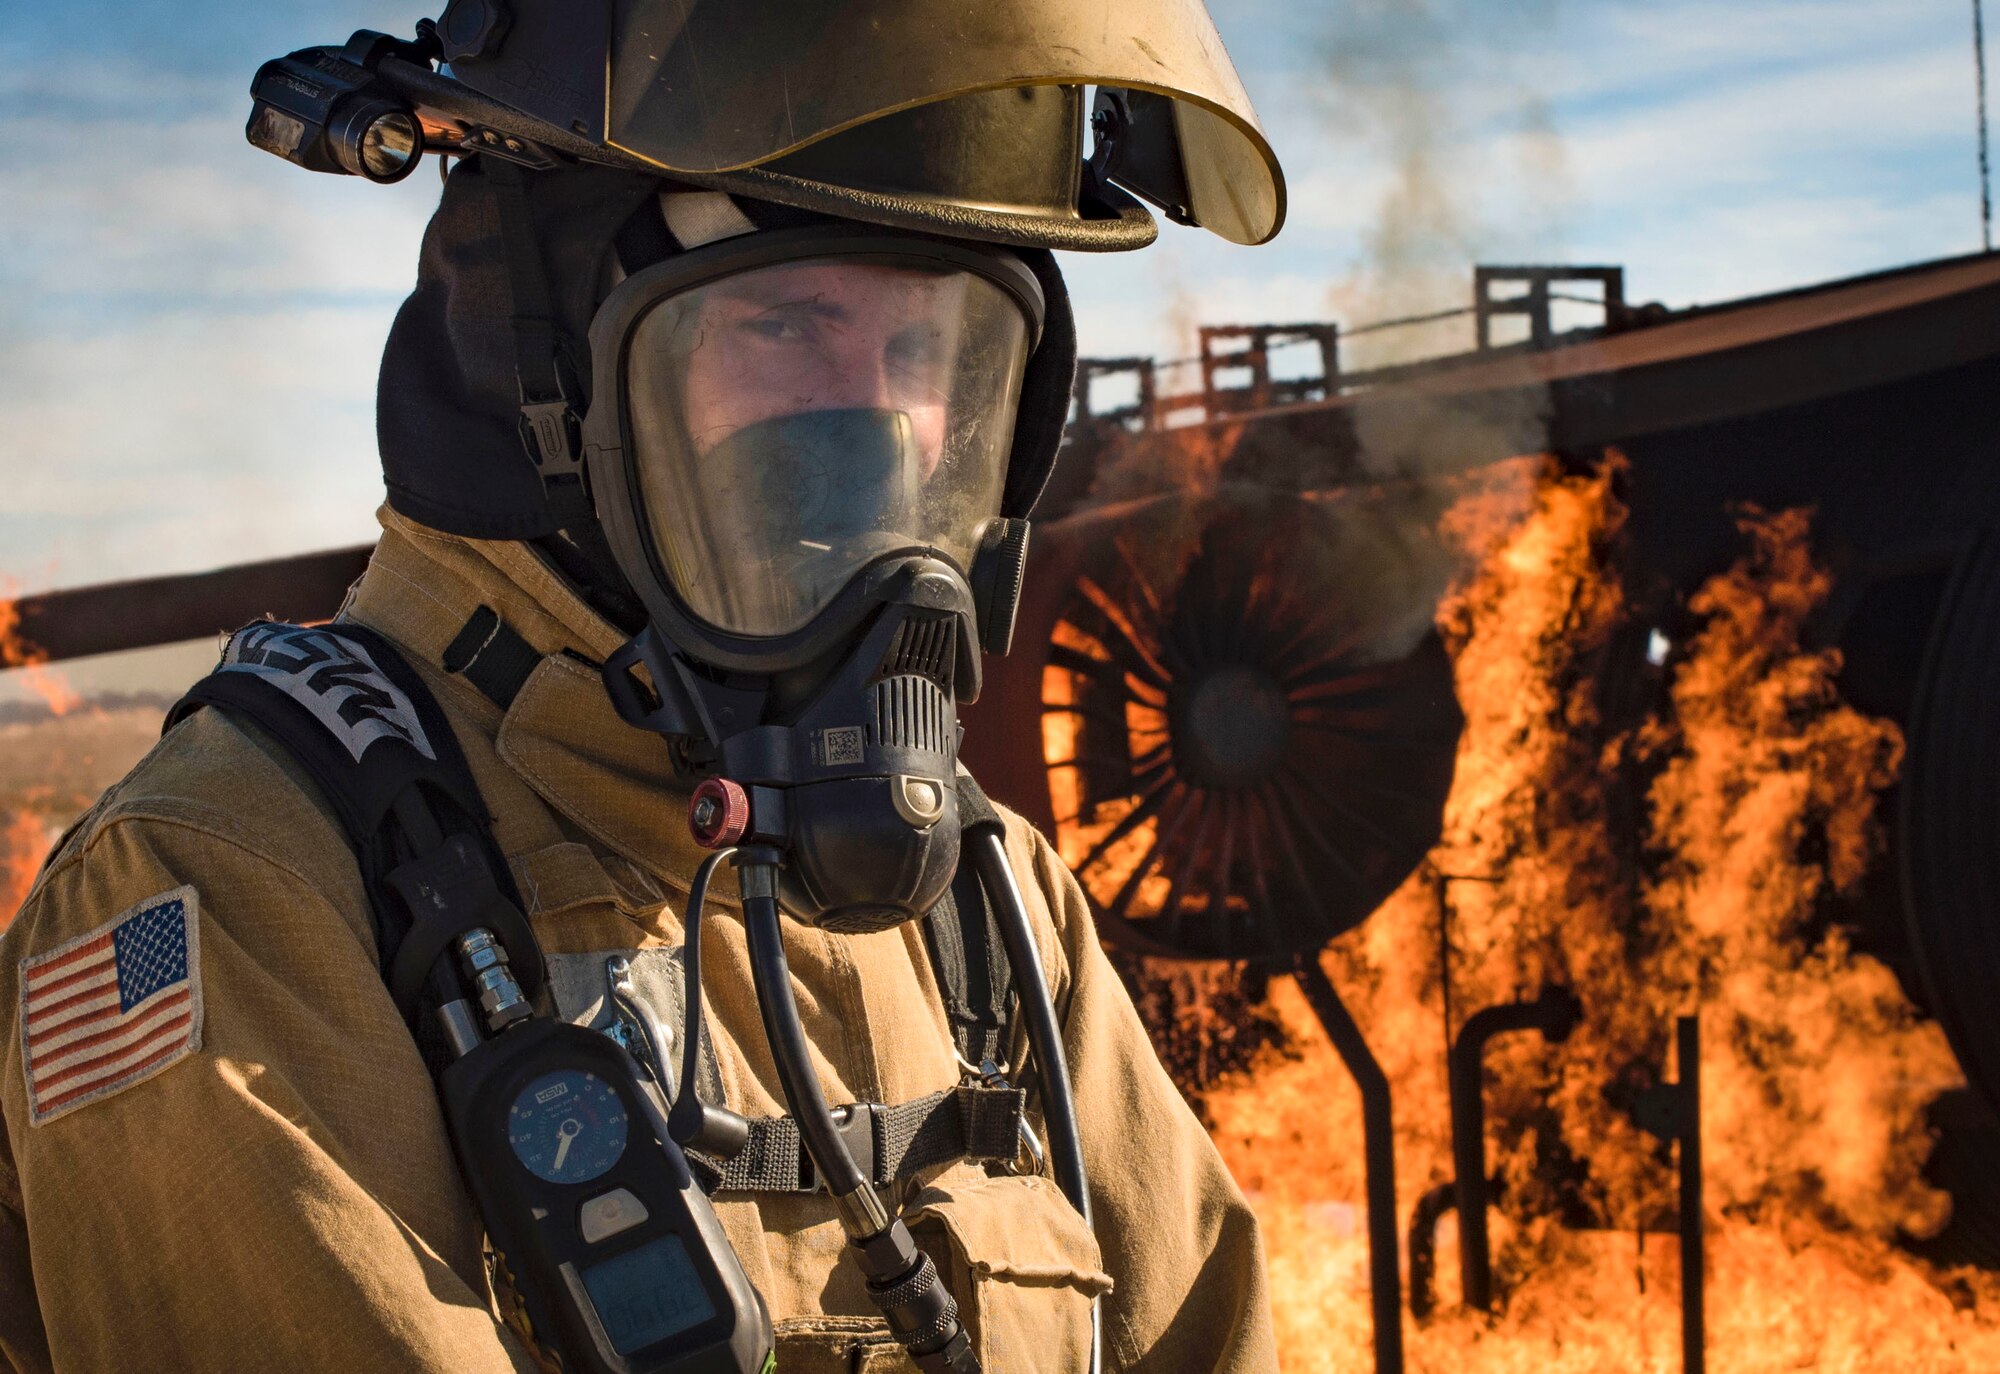 Staff Sgt. Brice Haylett, 99th Civil Engineer Squadron firefighter, catches his breath before instructing his team on proper firefighting procedures during a training exercise Oct. 23, 2018, at Nellis Air Force Base, Nev. More than a dozen firefighters from Nellis, Creech and Clark County Fire Departments participated in the exercise. (U.S. Air Force photo by Airman 1st Class Andrew D. Sarver)